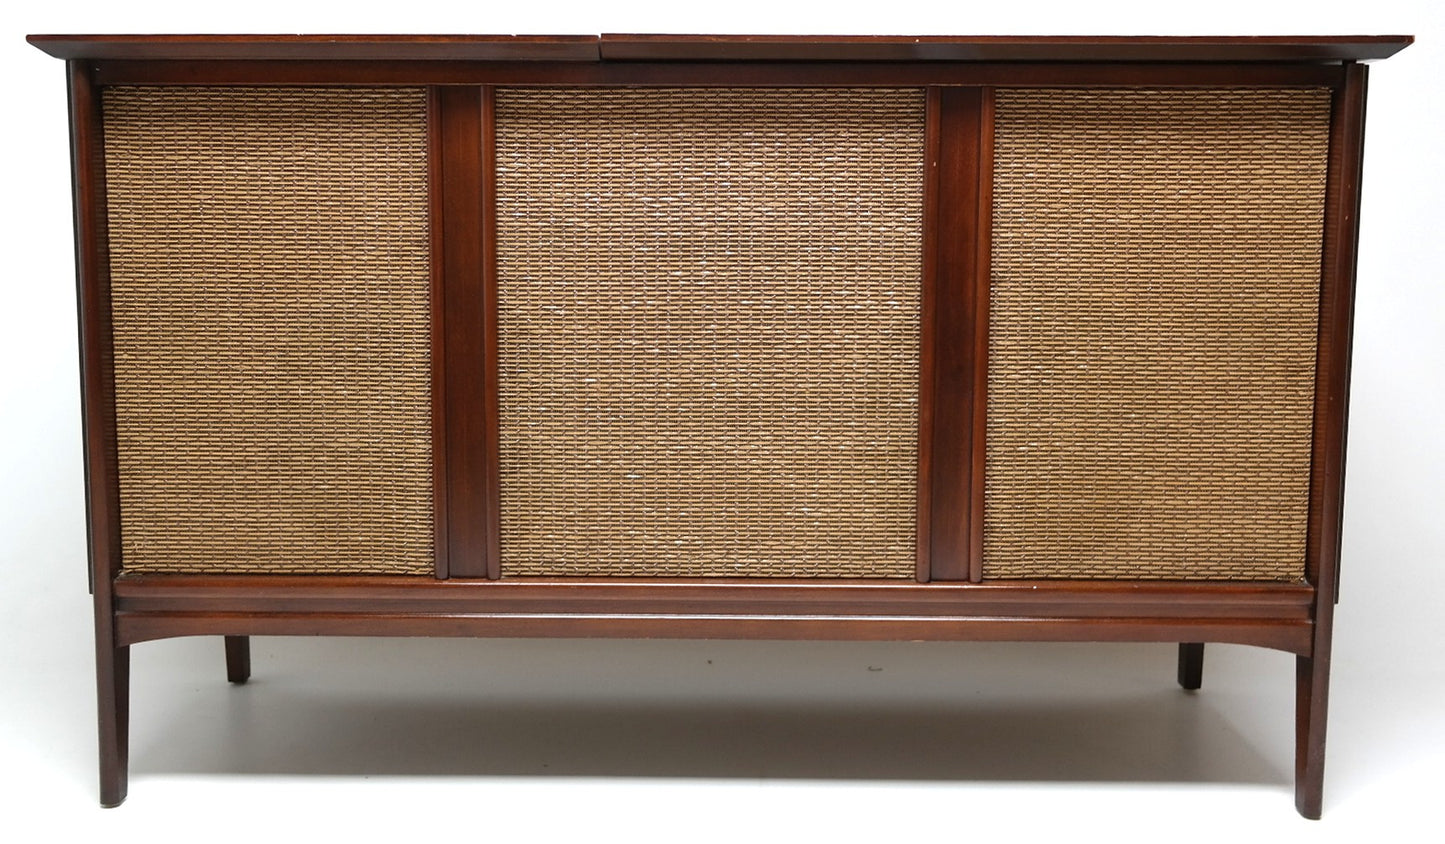 Mid Century Admiral Stereo Console Record Player - Bluetooth - AM/FM Tuner - Record Changer The Vintedge Co.